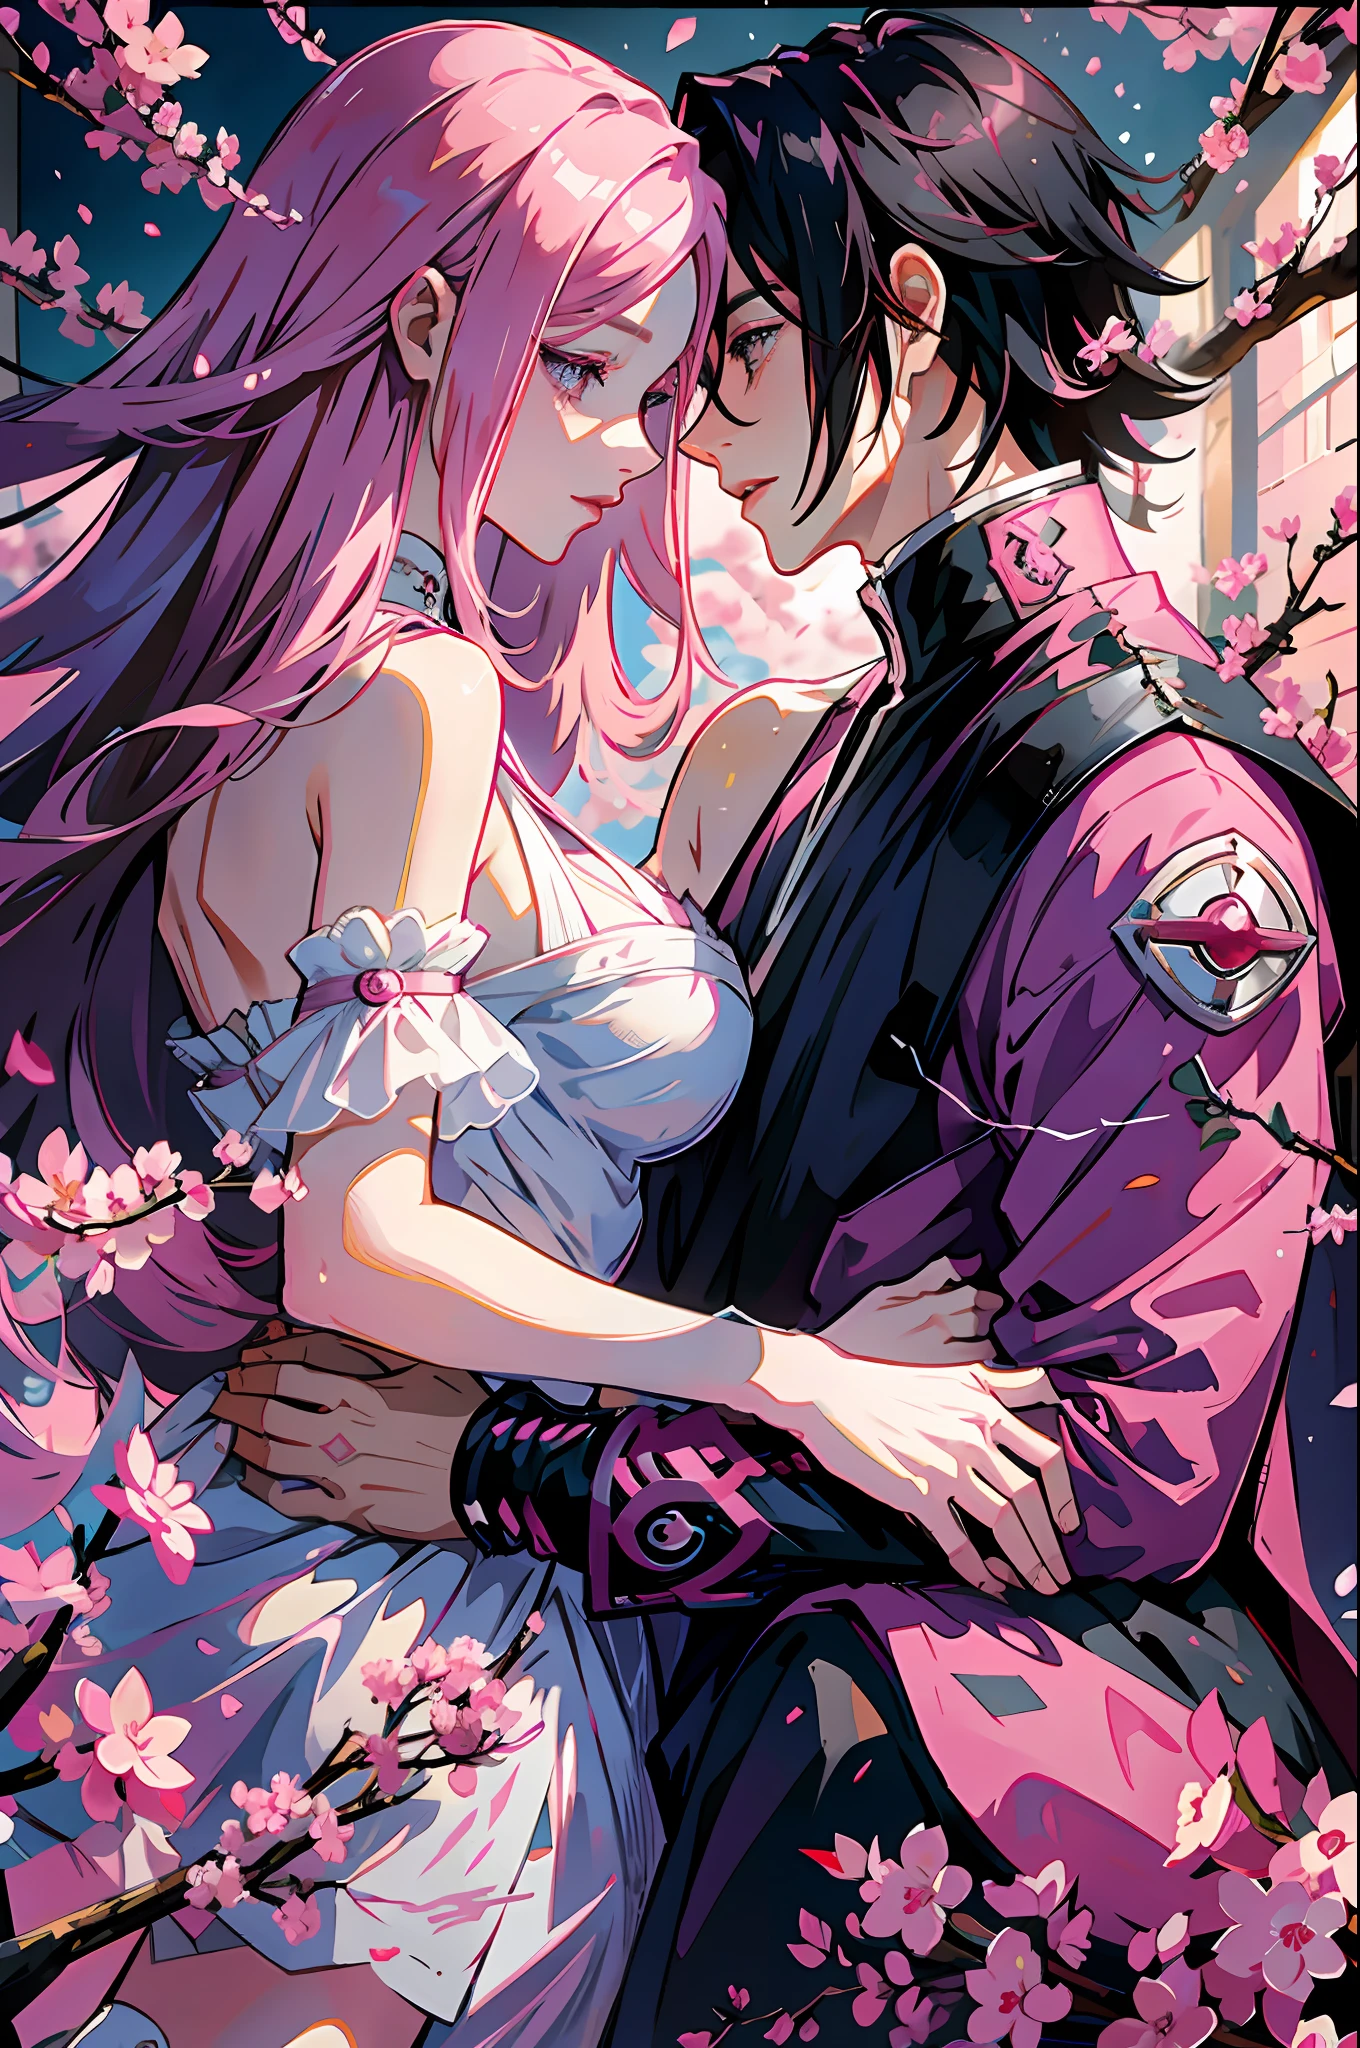 Pink haired woman lying in the arms of a black haired man, royalty, nobility, princess, elegant, kiss, high quality, couple, kiss, ((sasuke and sakura)). man and woman, staring at each other